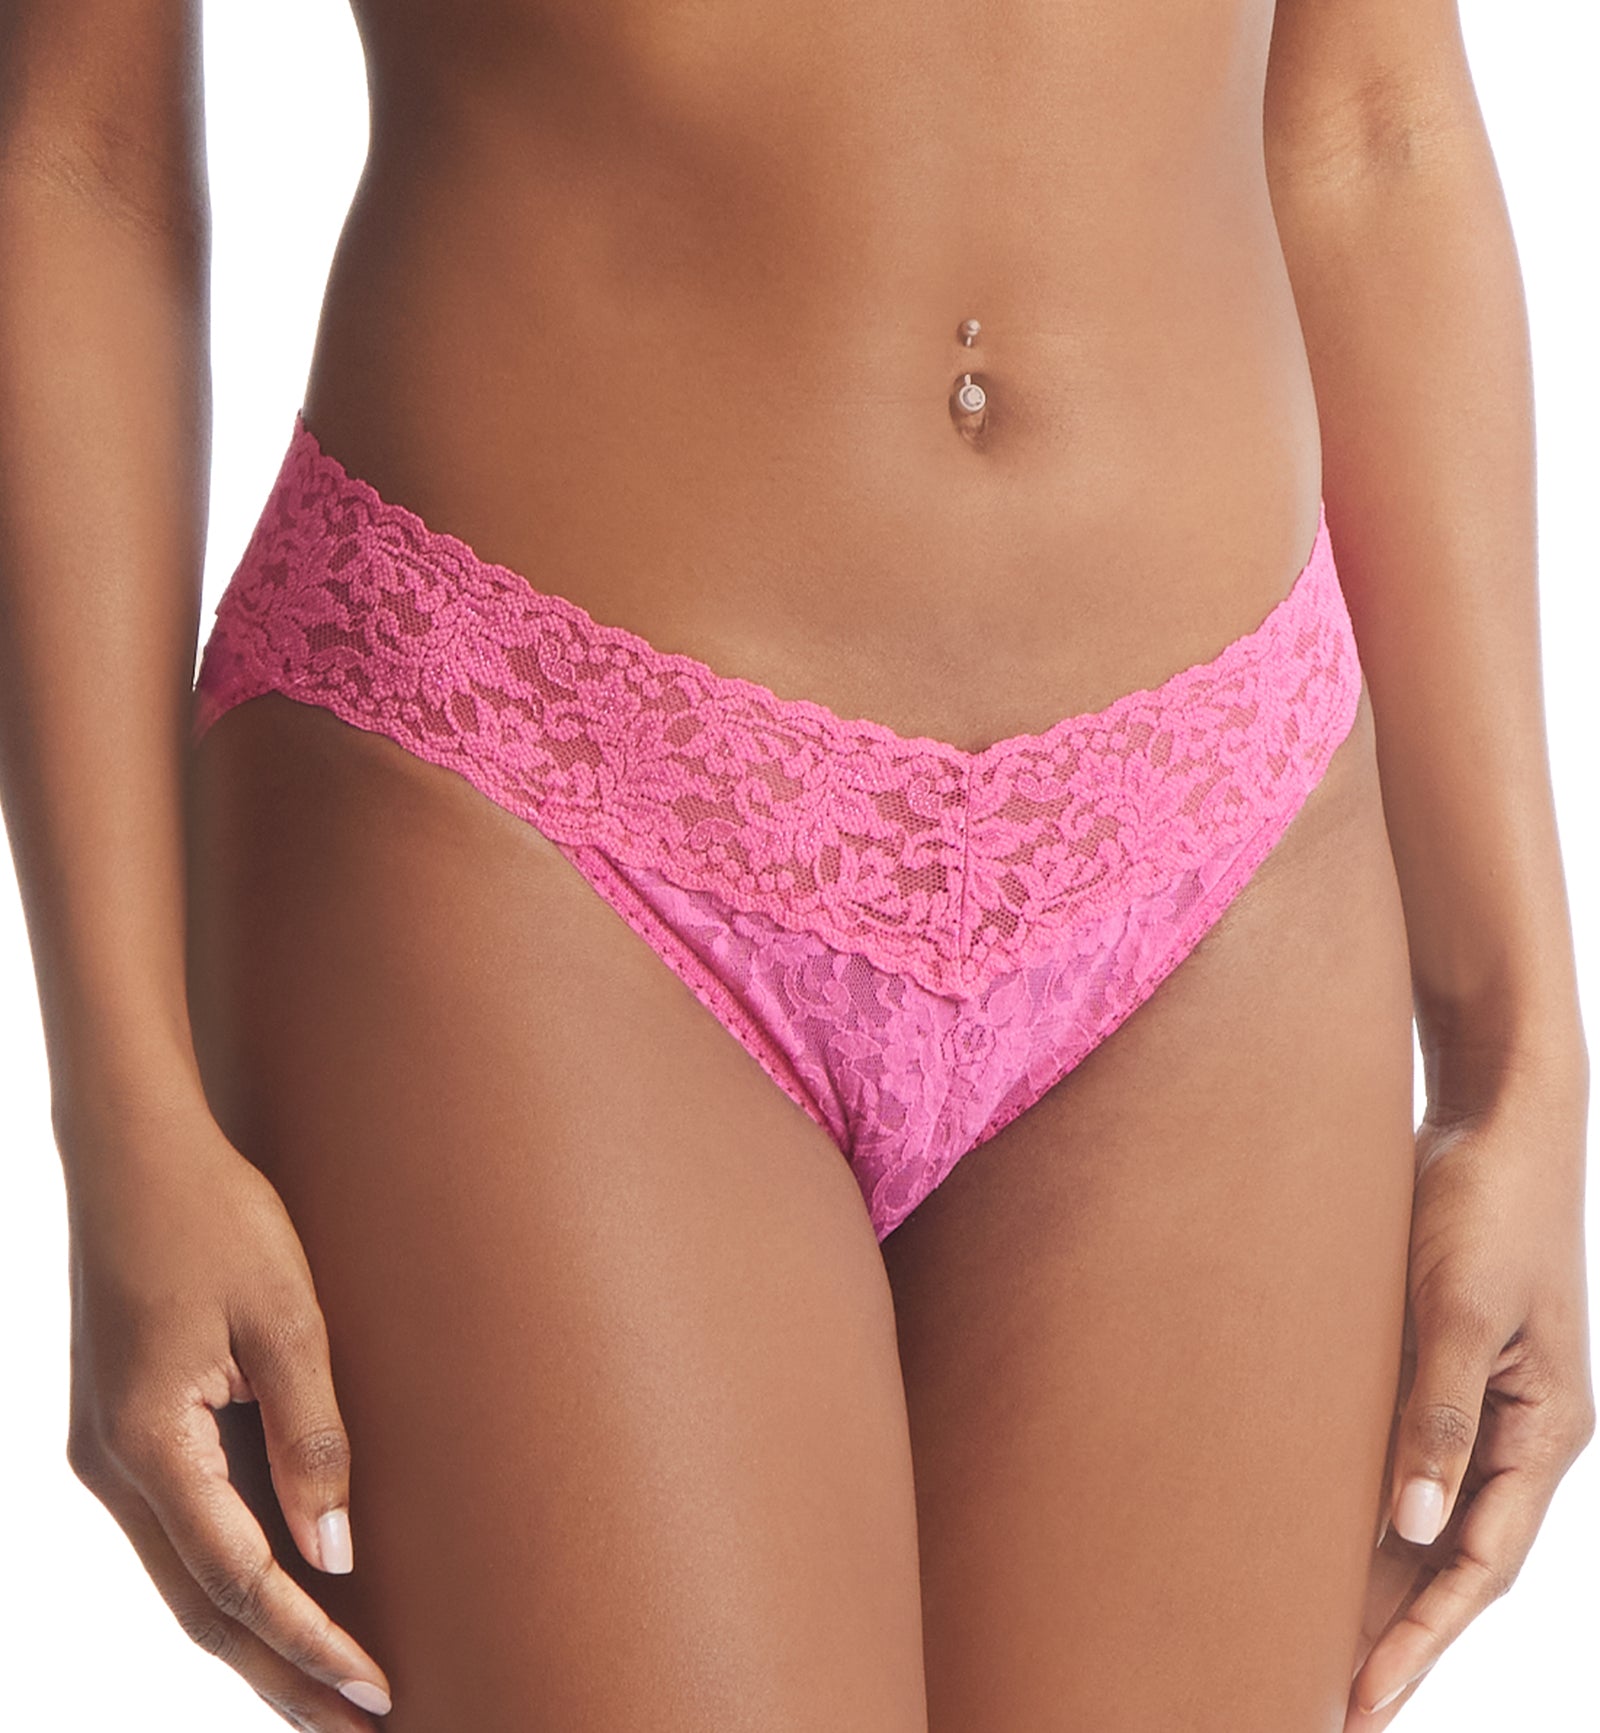 Hanky Panky Signature Lace Vikini (482374),Small,Intuition - Intuition,Small